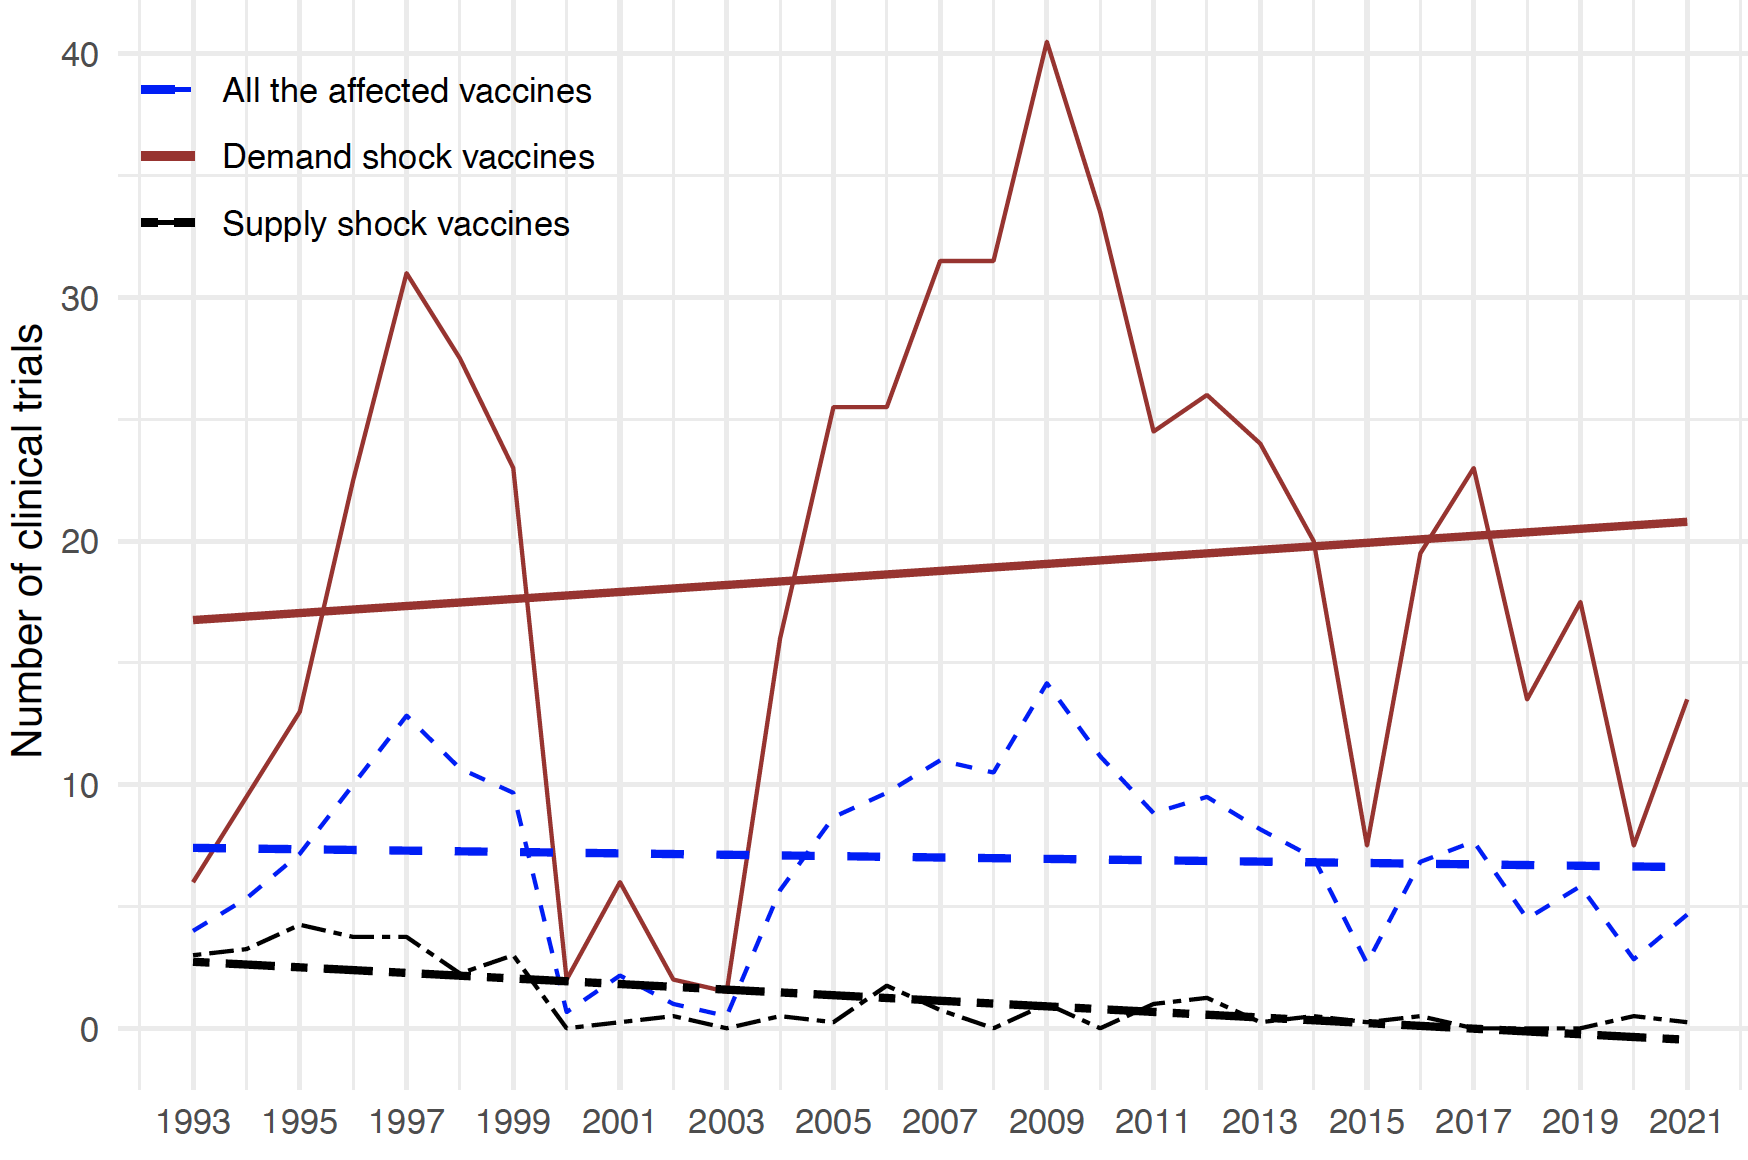 Vaccine Investments: Supply- vs. Demand-Side Policy